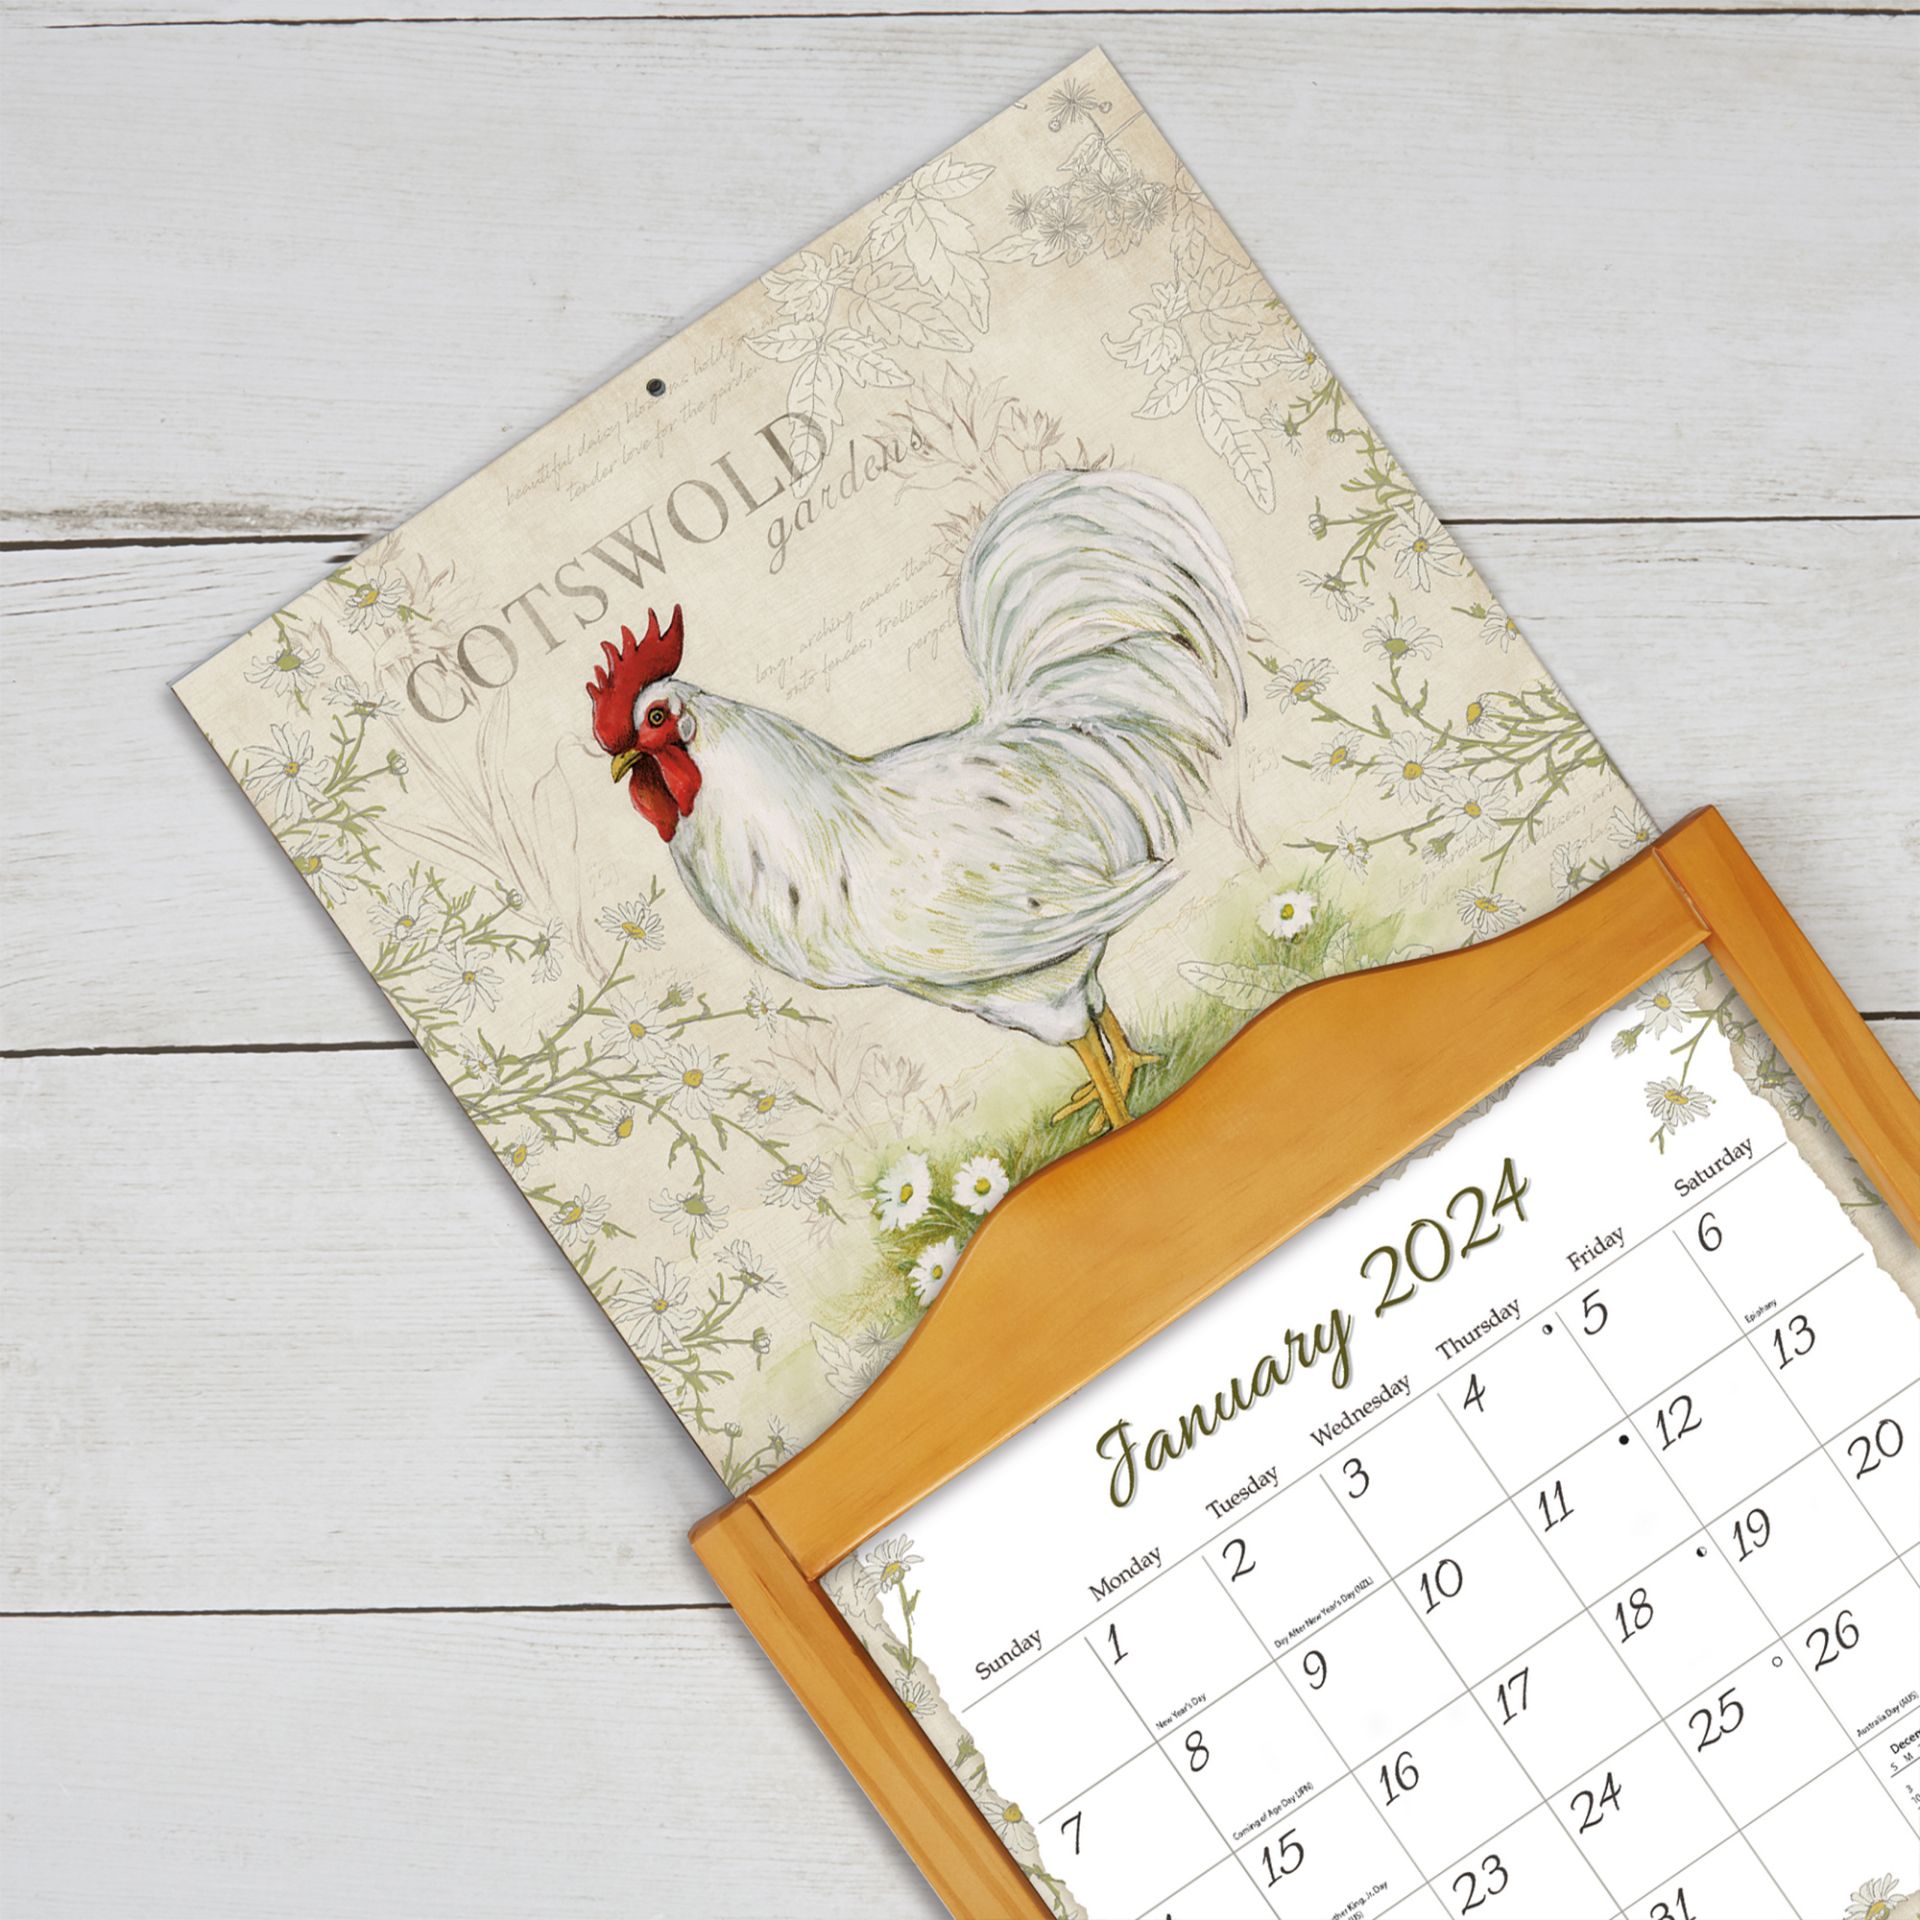 Lang Wall Calendar 2024 Proud Rooster Nextra Dianella